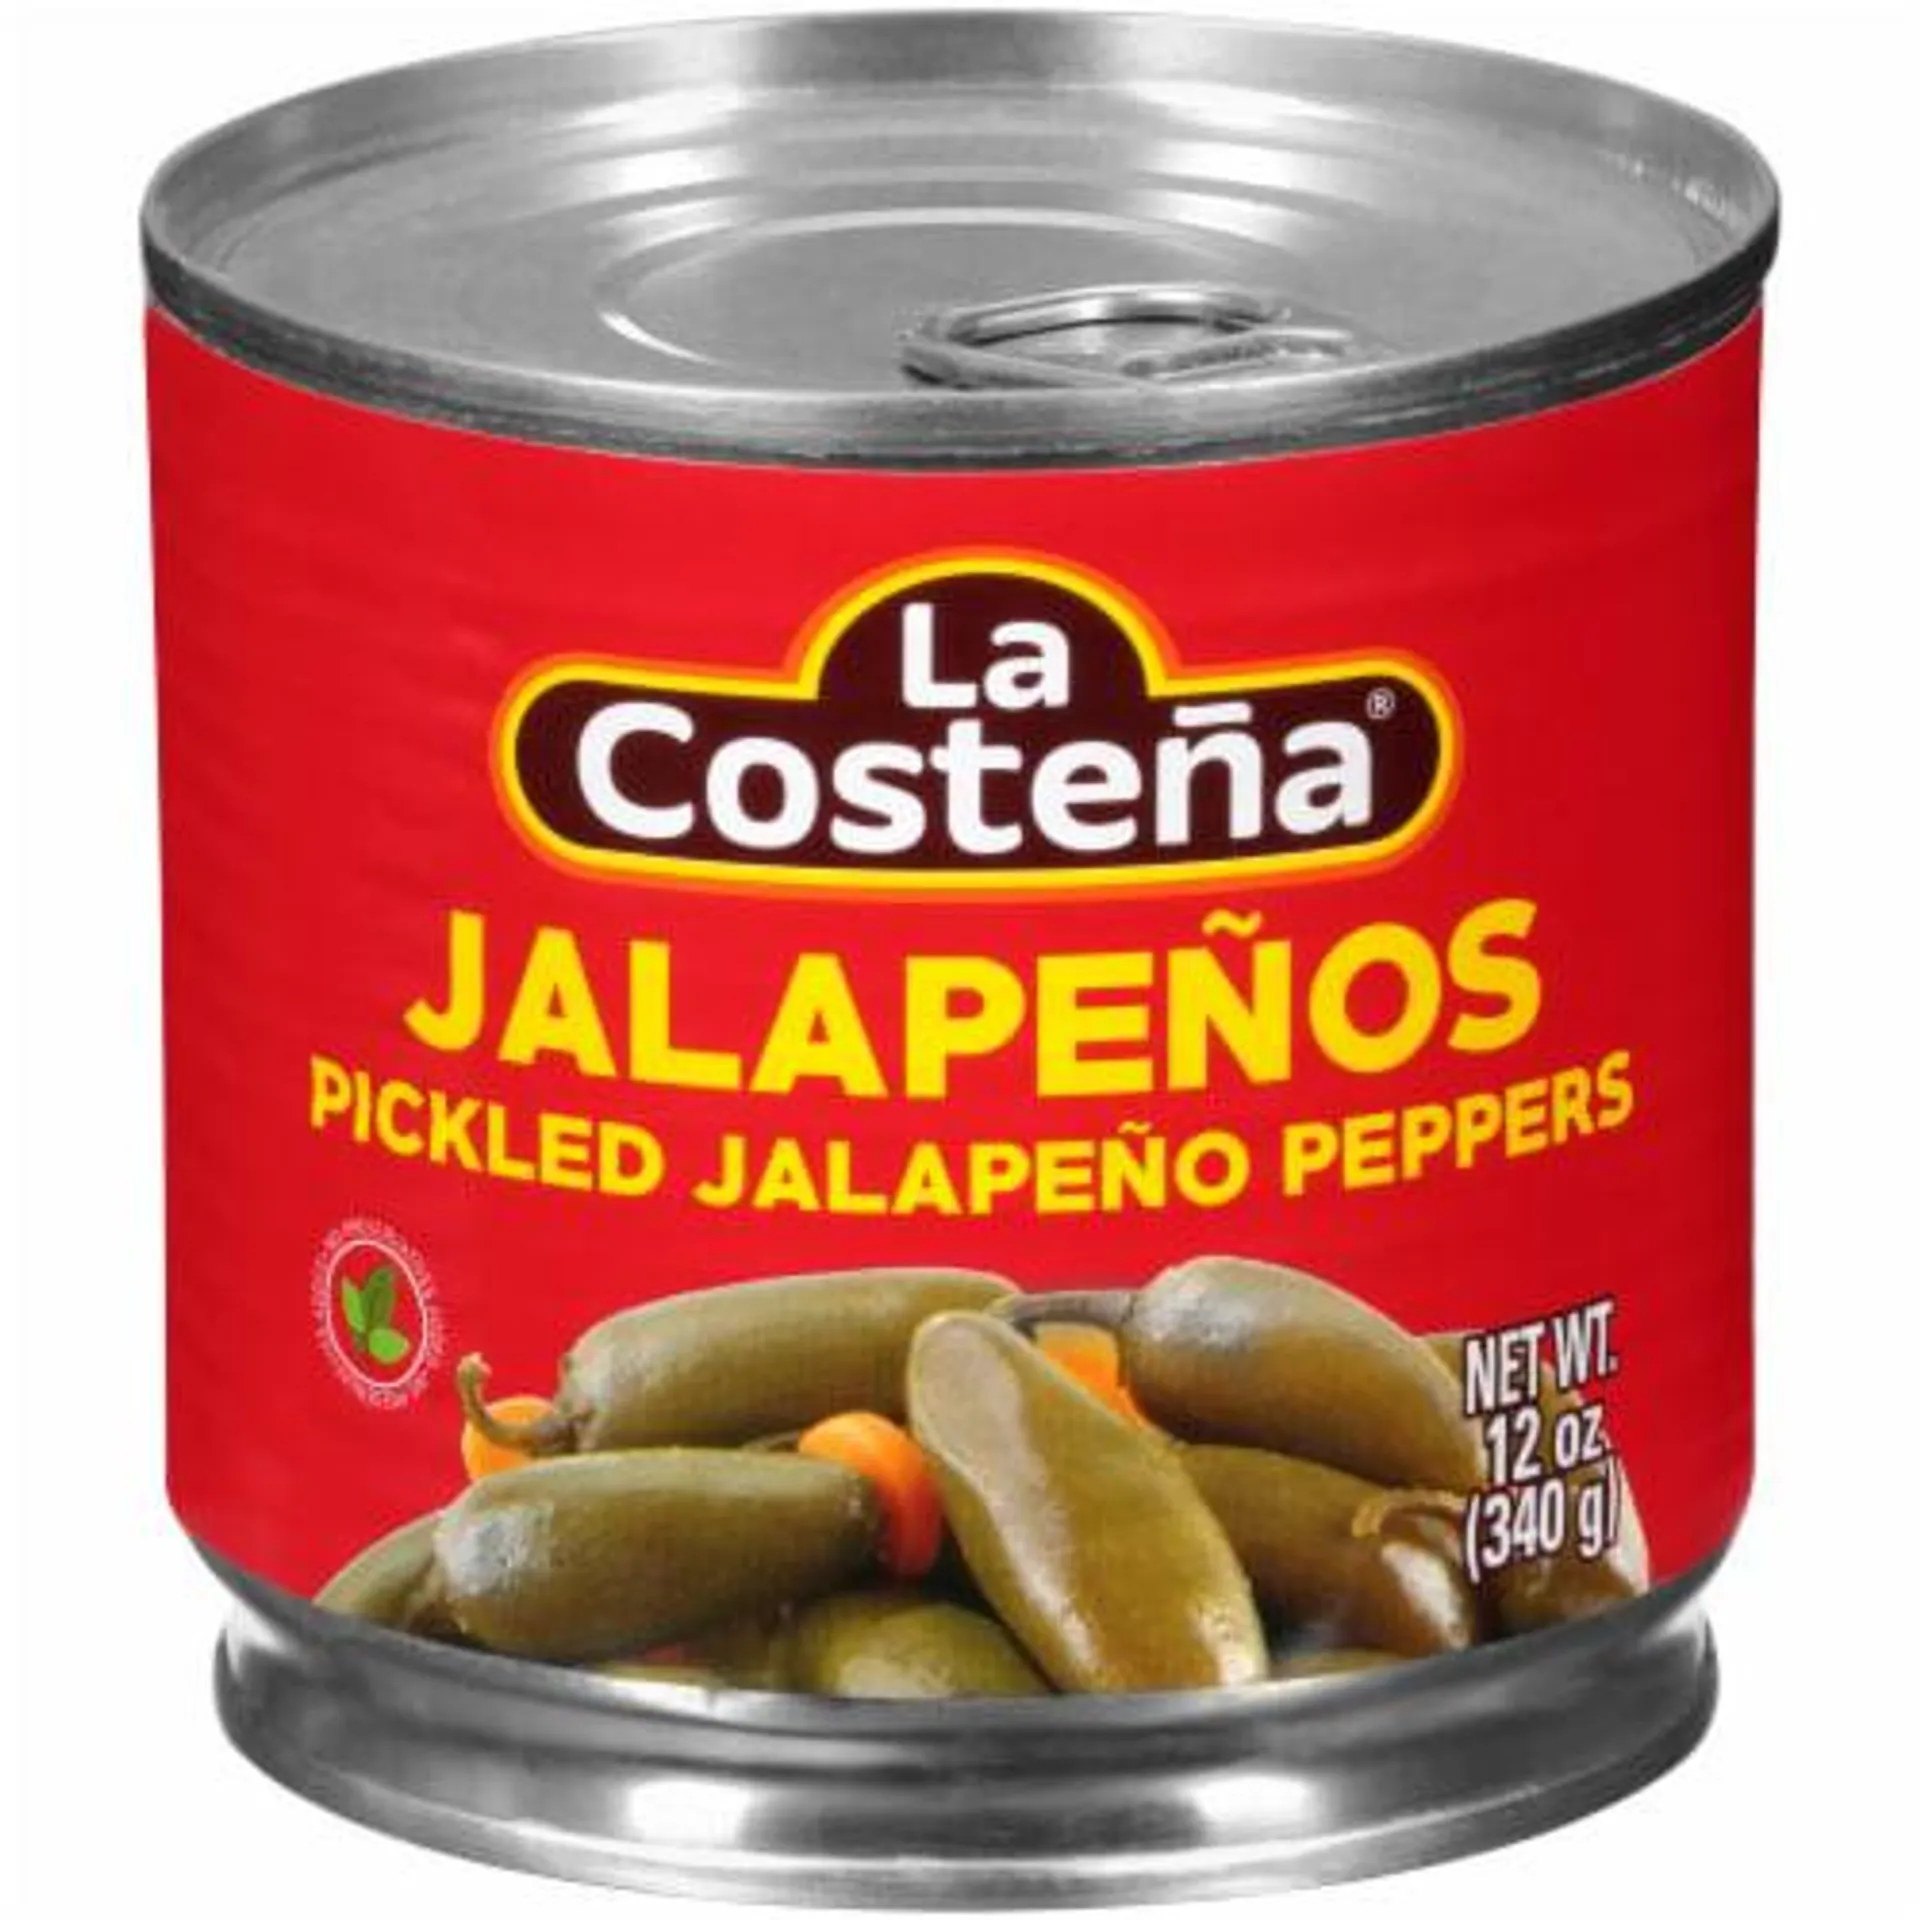 La Costena® Pickled Jalapeno Peppers